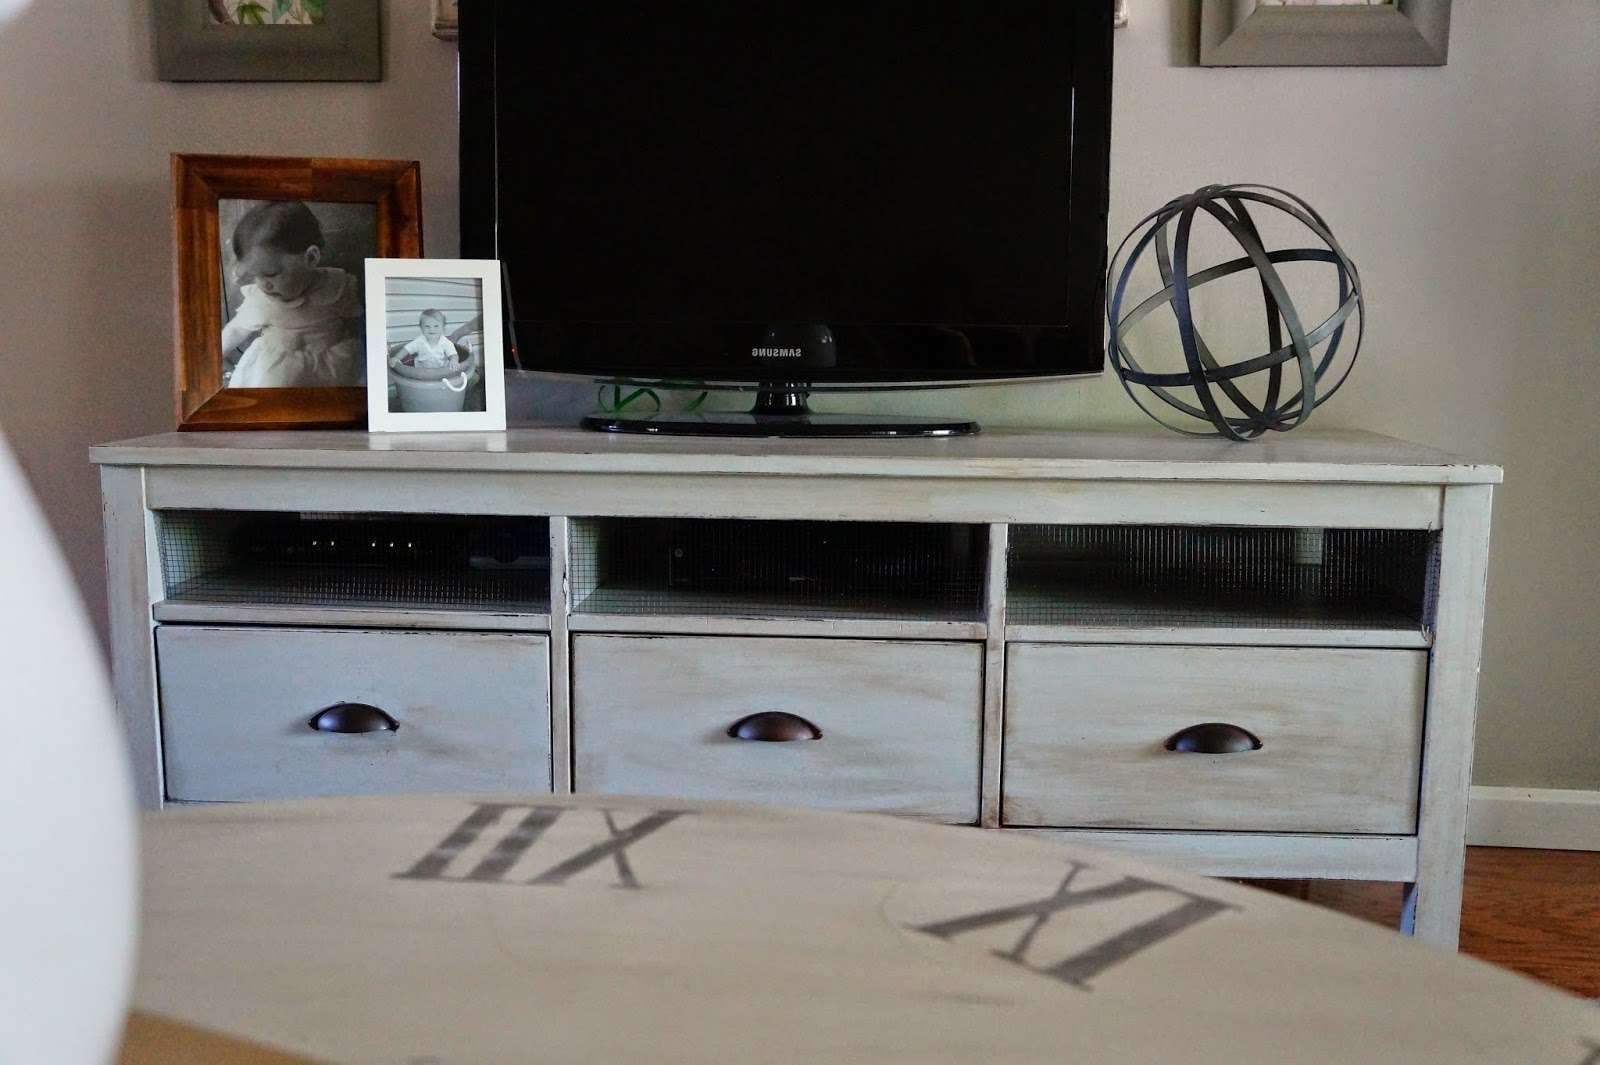 Shabby Chic Ikea Tv Stand With Mount And Drawers – Decofurnish In Shabby Chic Tv Cabinets (View 16 of 20)